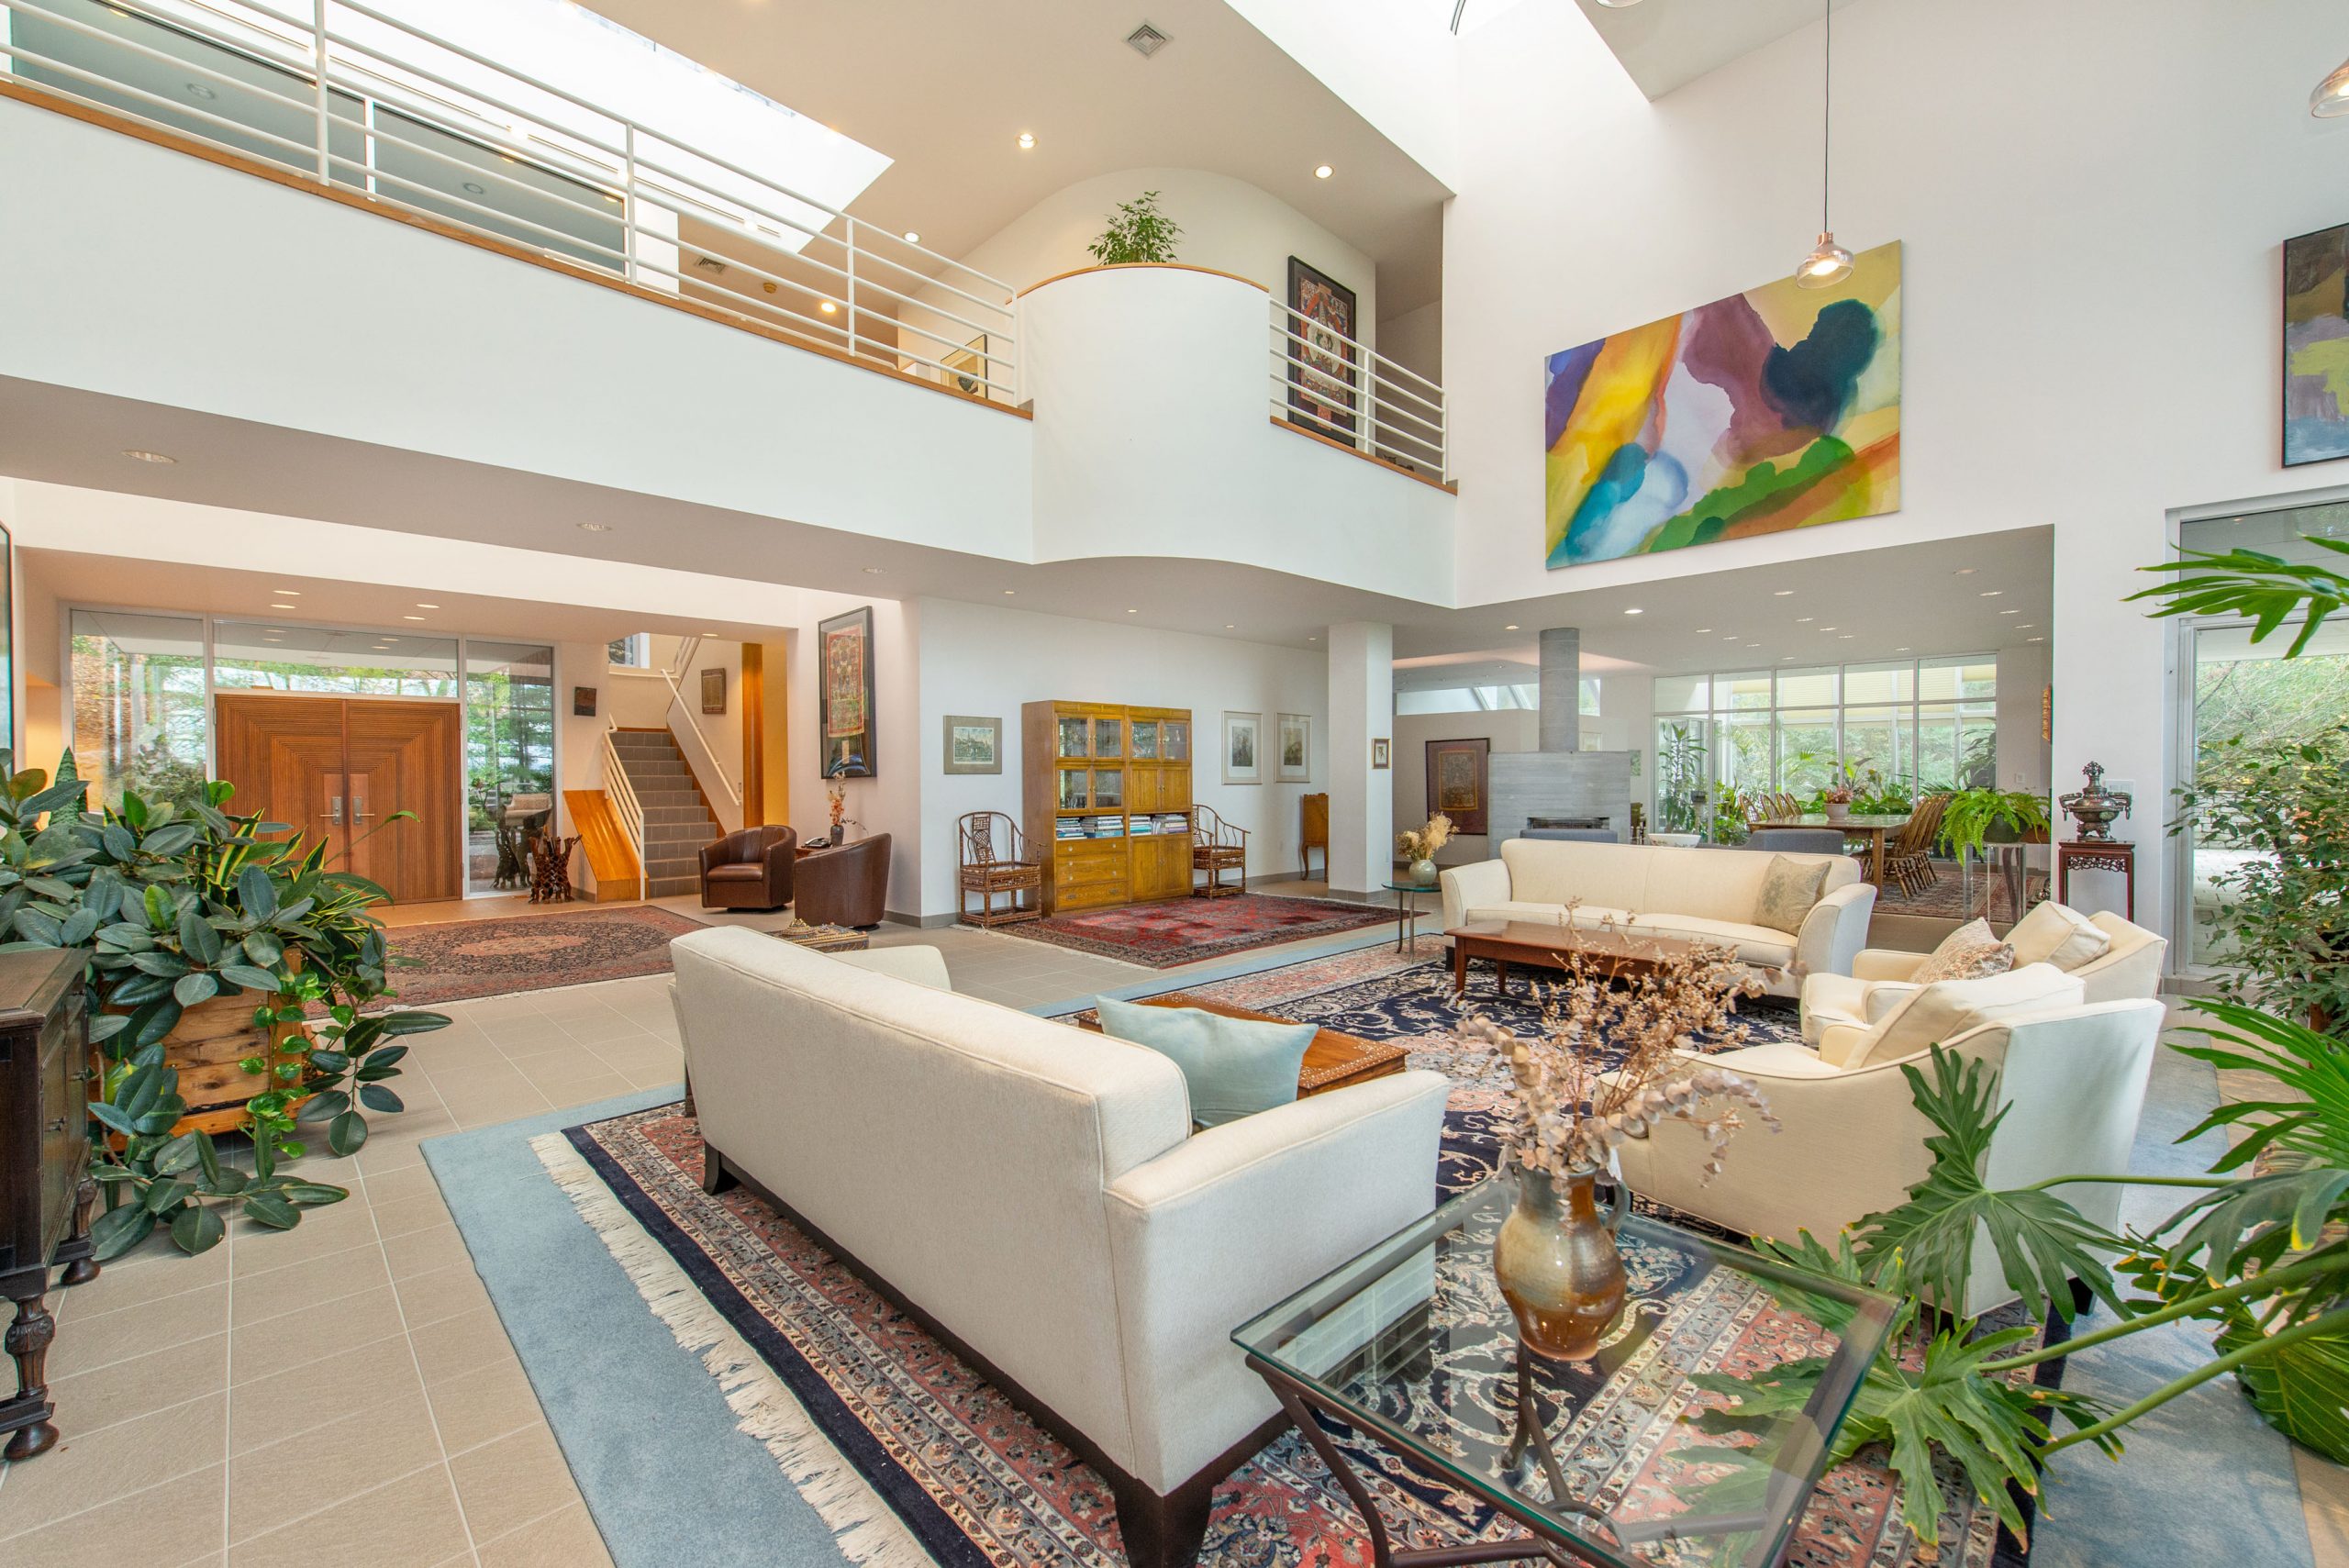 3-story expansive space in New Jersey